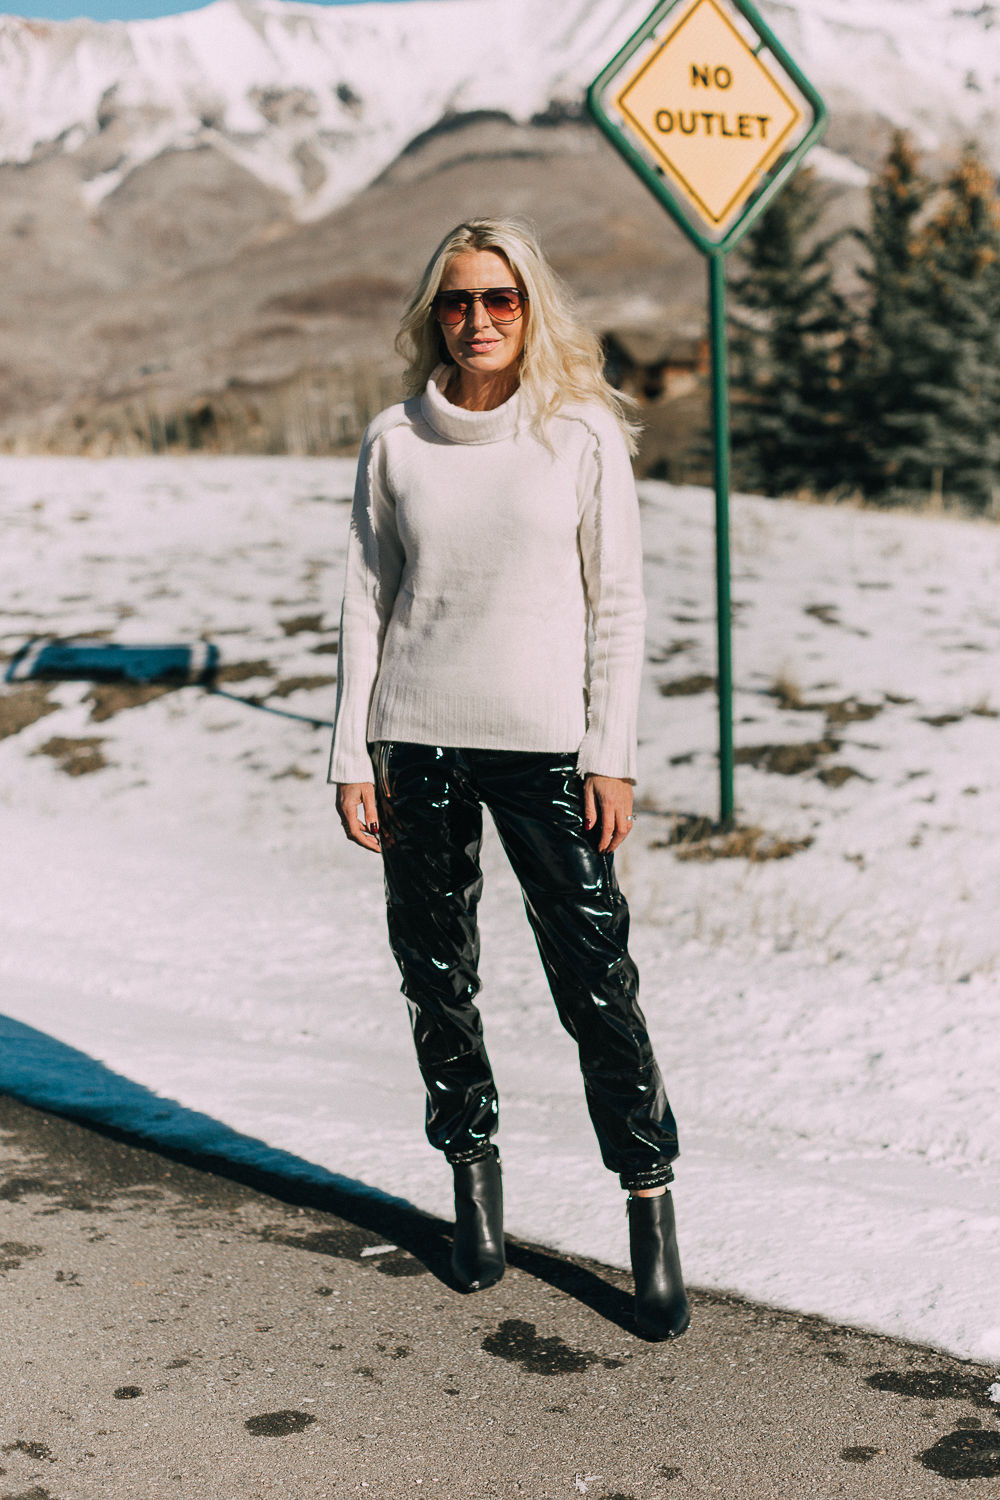 Fashion blogger over 40 Erin Busbee of BusbeeStyle.com wearing black vinyl jogger pants by RtA with black Michael Kors booties and a white cashmere turtleneck sweater by Brochu Walker, in Telluride, Colorado